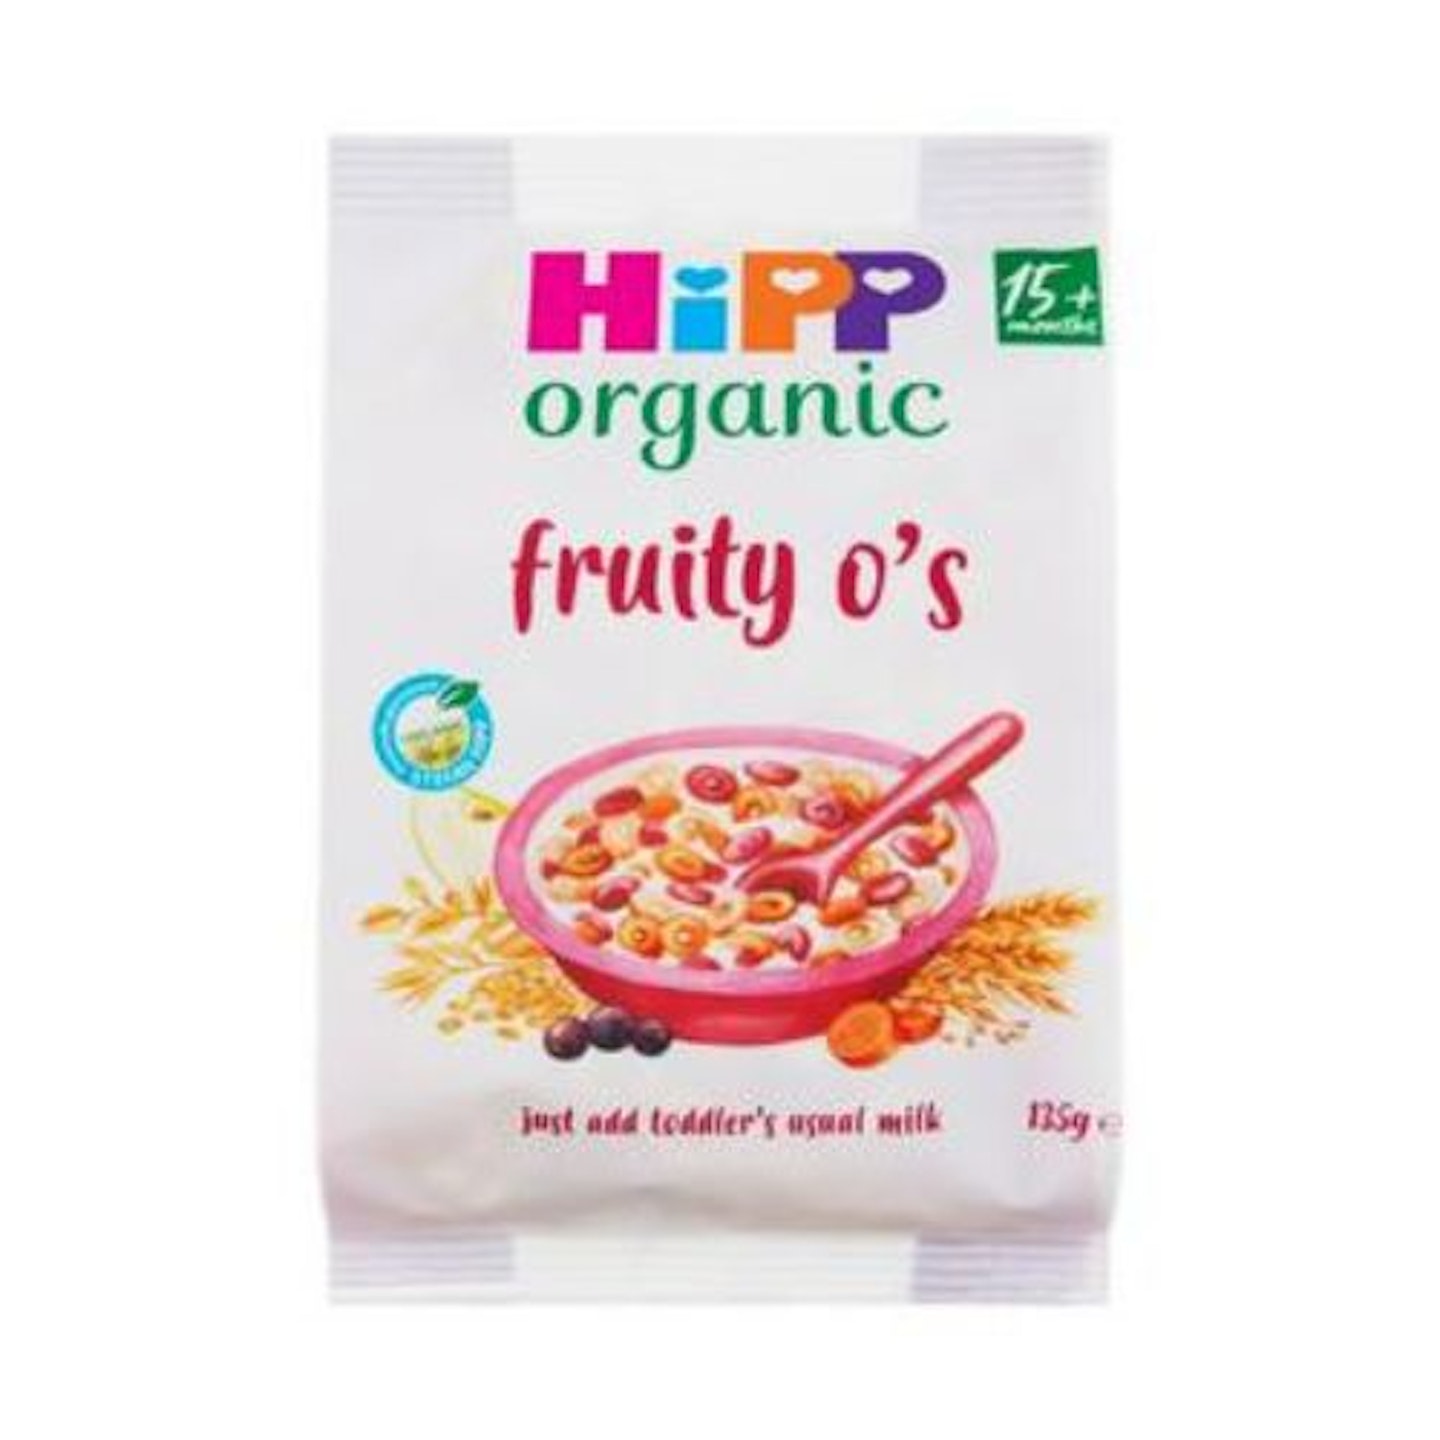 Hipp Organic Fruity O's Cereal 15+ Months